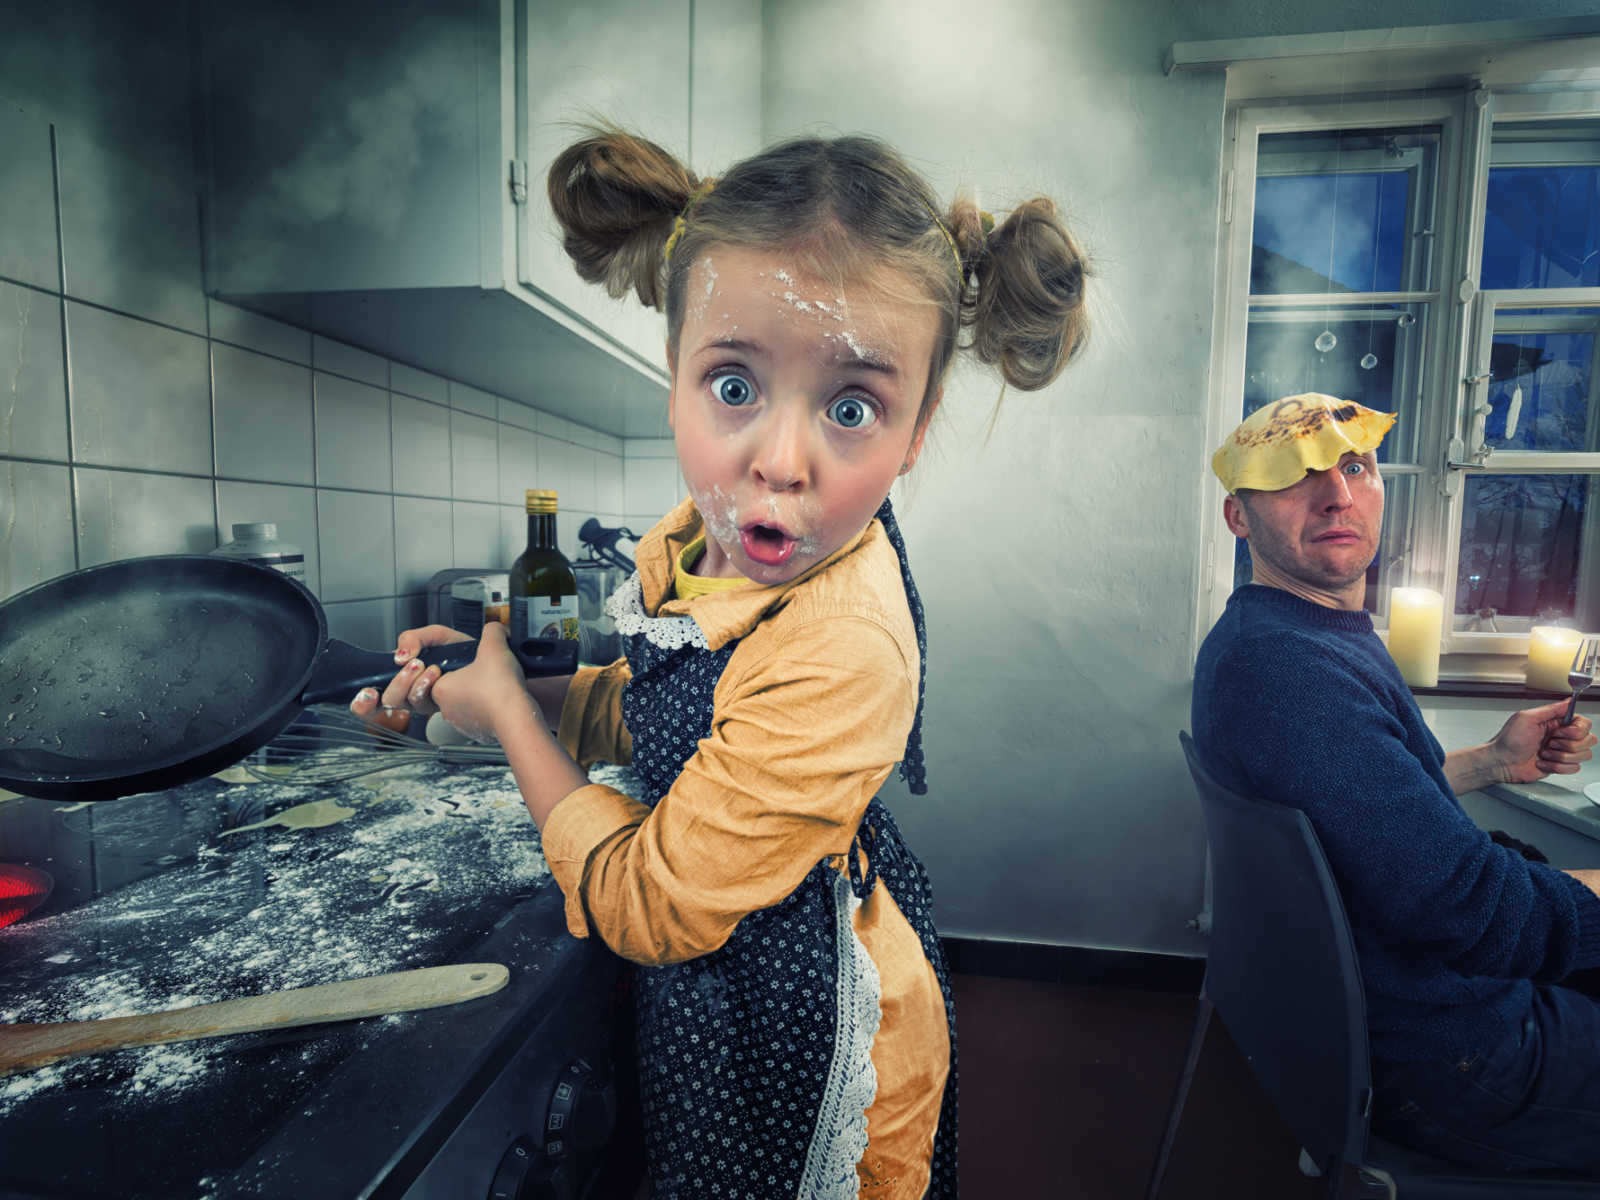 Young girl stands in animated messy kitchen with frying pan in hand while dad has pancake on his head in background